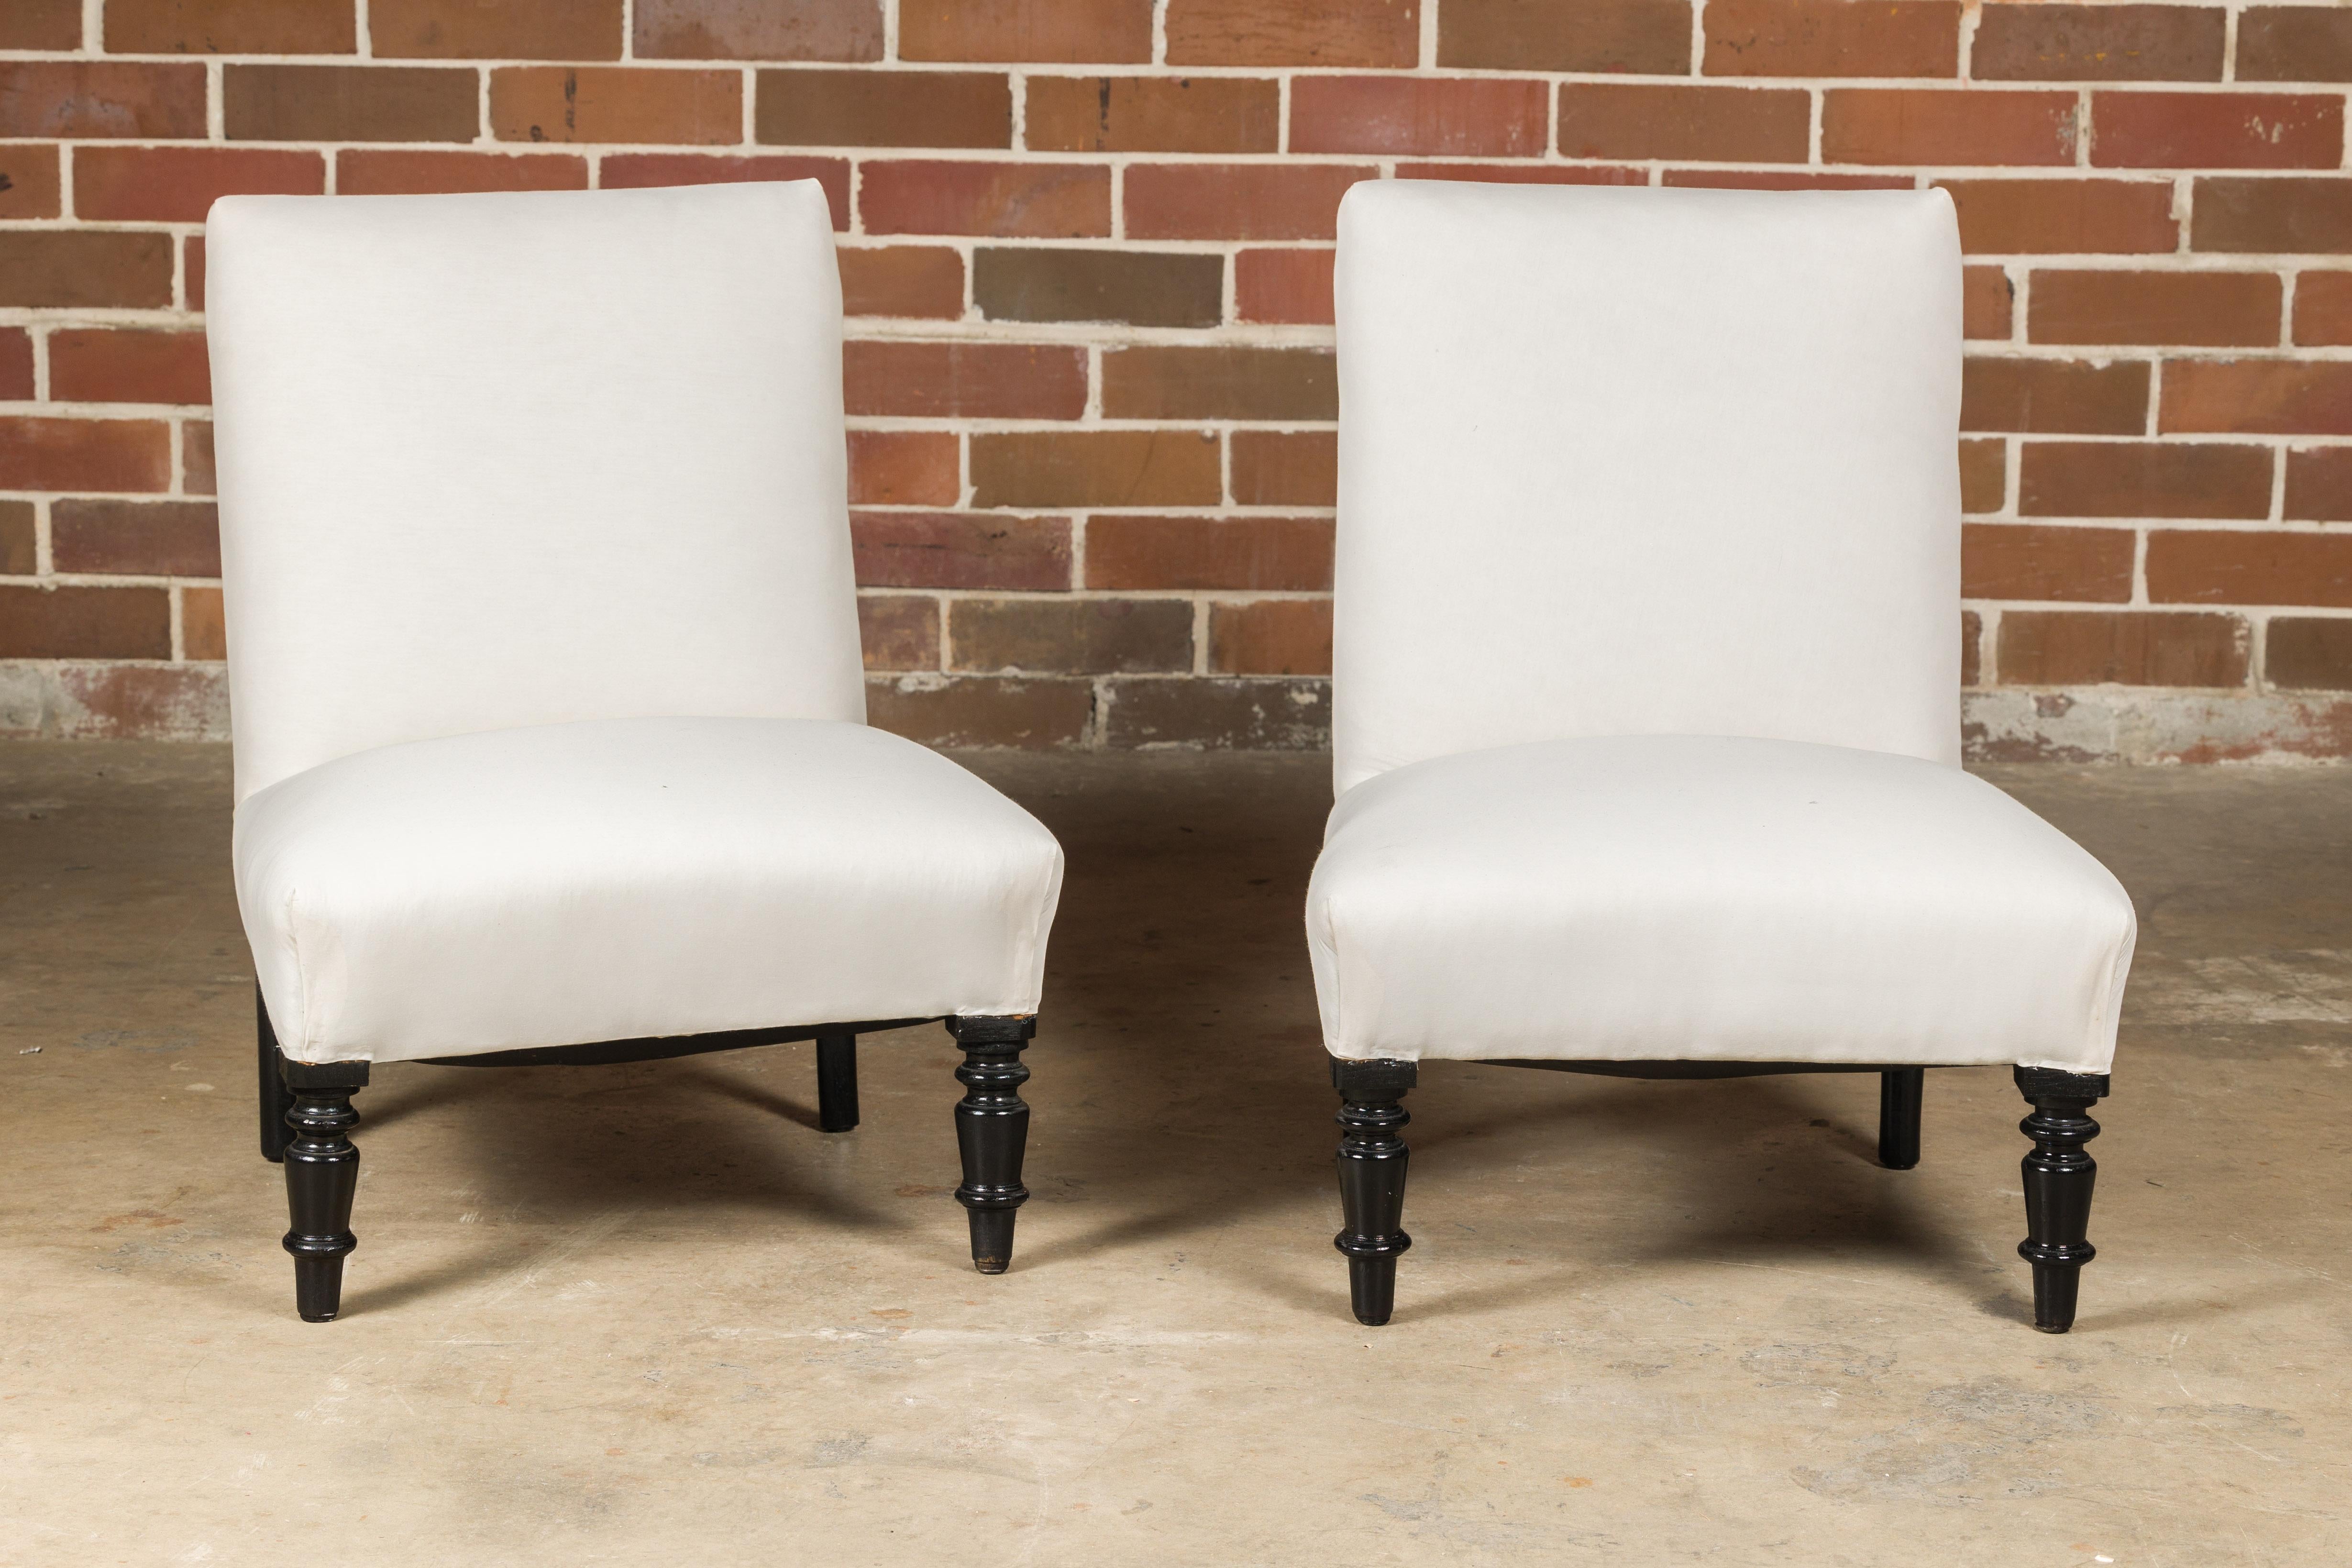 A pair of French slipper chairs from circa 1900 with ebonized turned legs and upholstered seats. Delve into the refined elegance of these French slipper chairs from circa 1900, pieces that exude the grace and sophistication of their time. With their